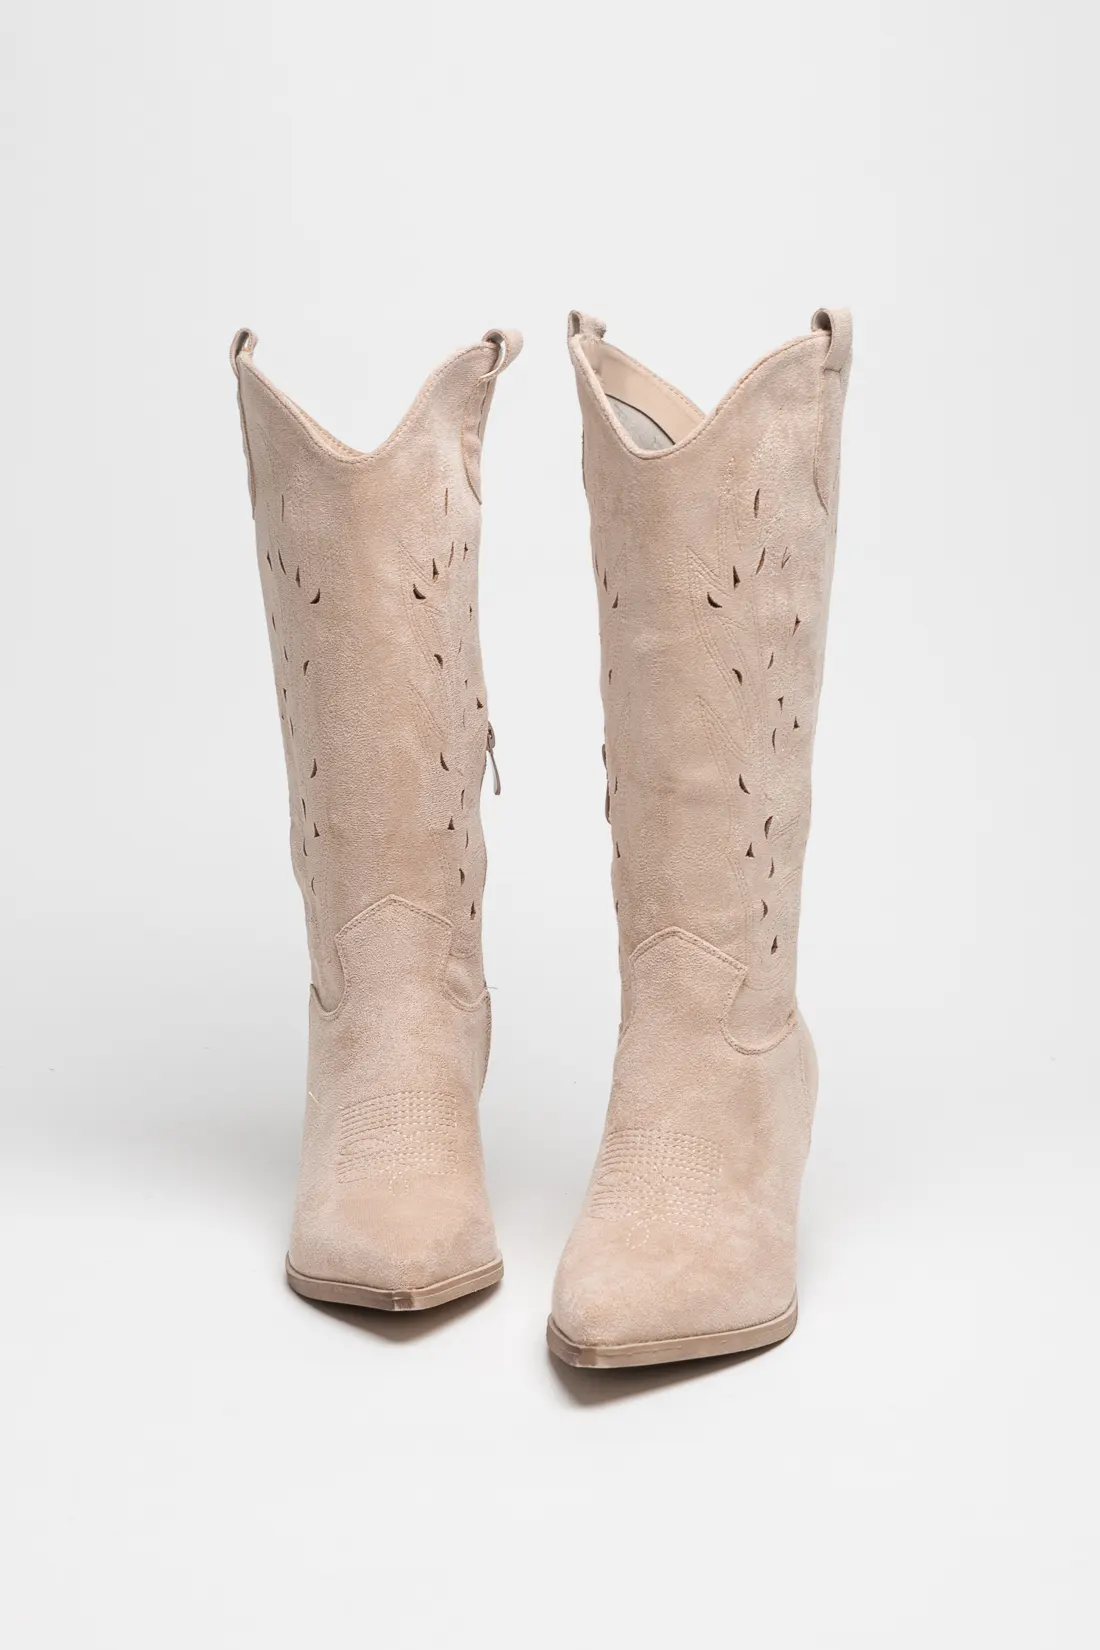 BOTTE COUNTRY RODERY - BEIGE